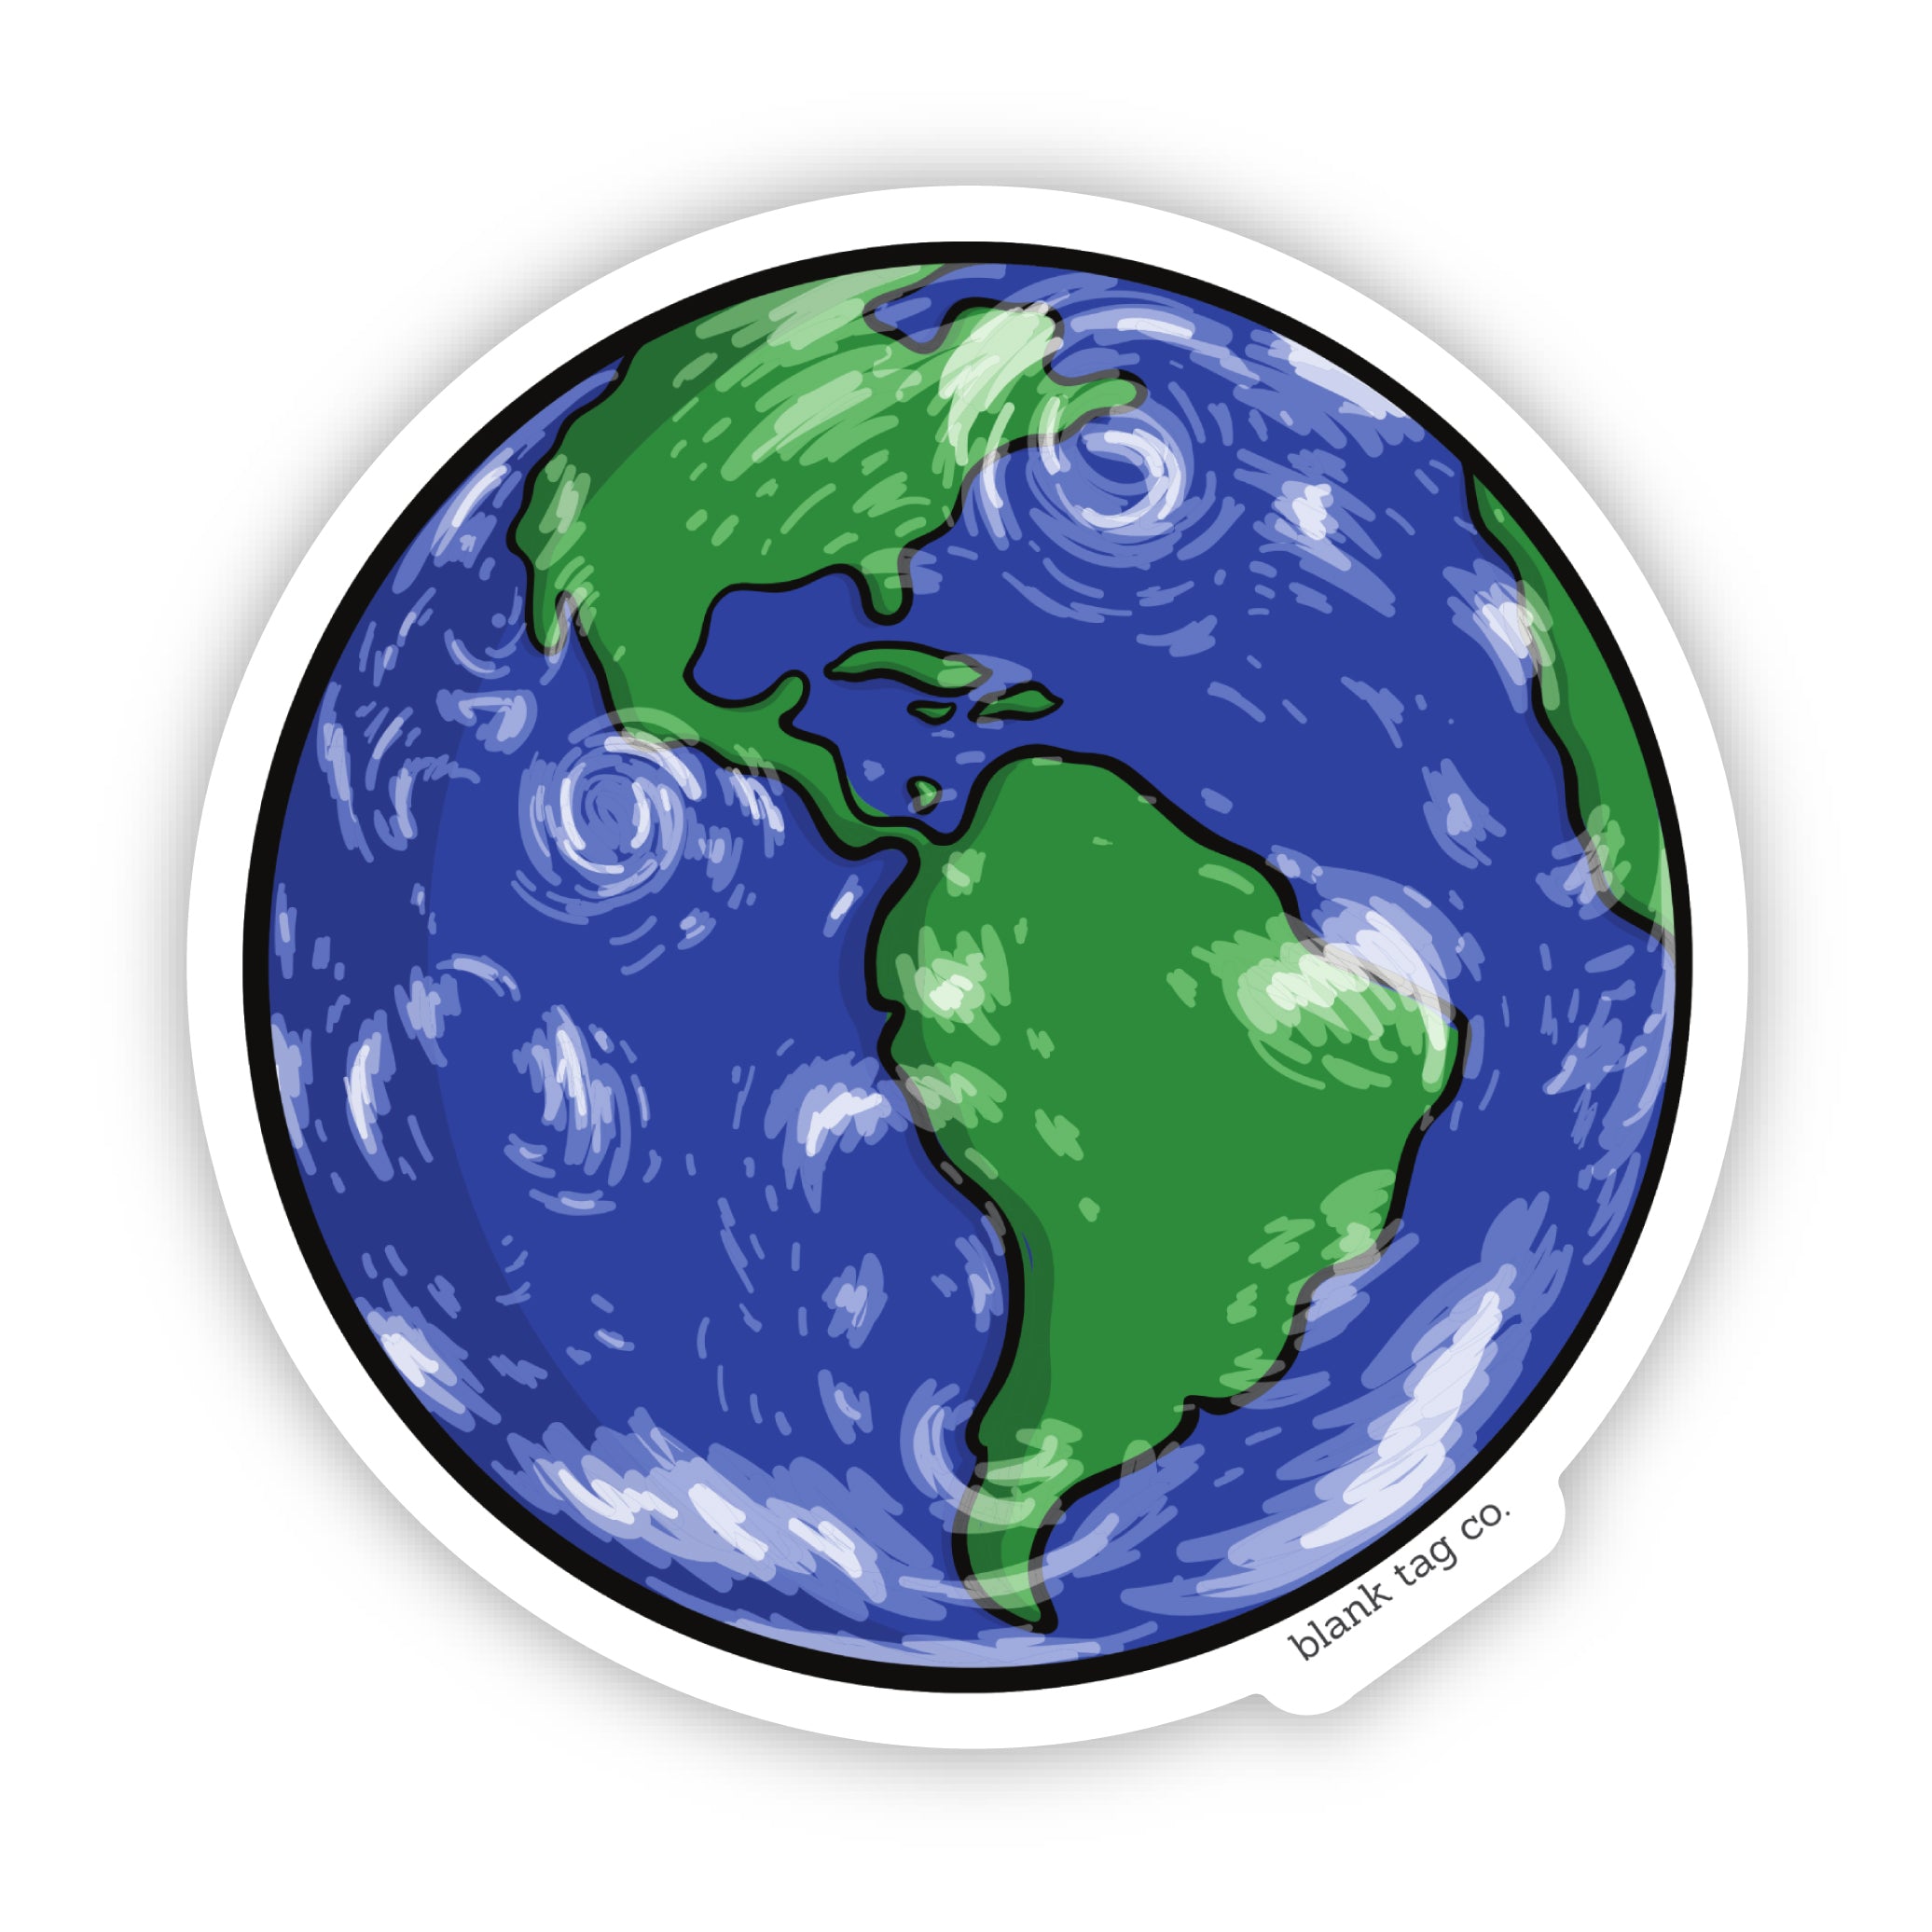 The Planet Earth Sticker